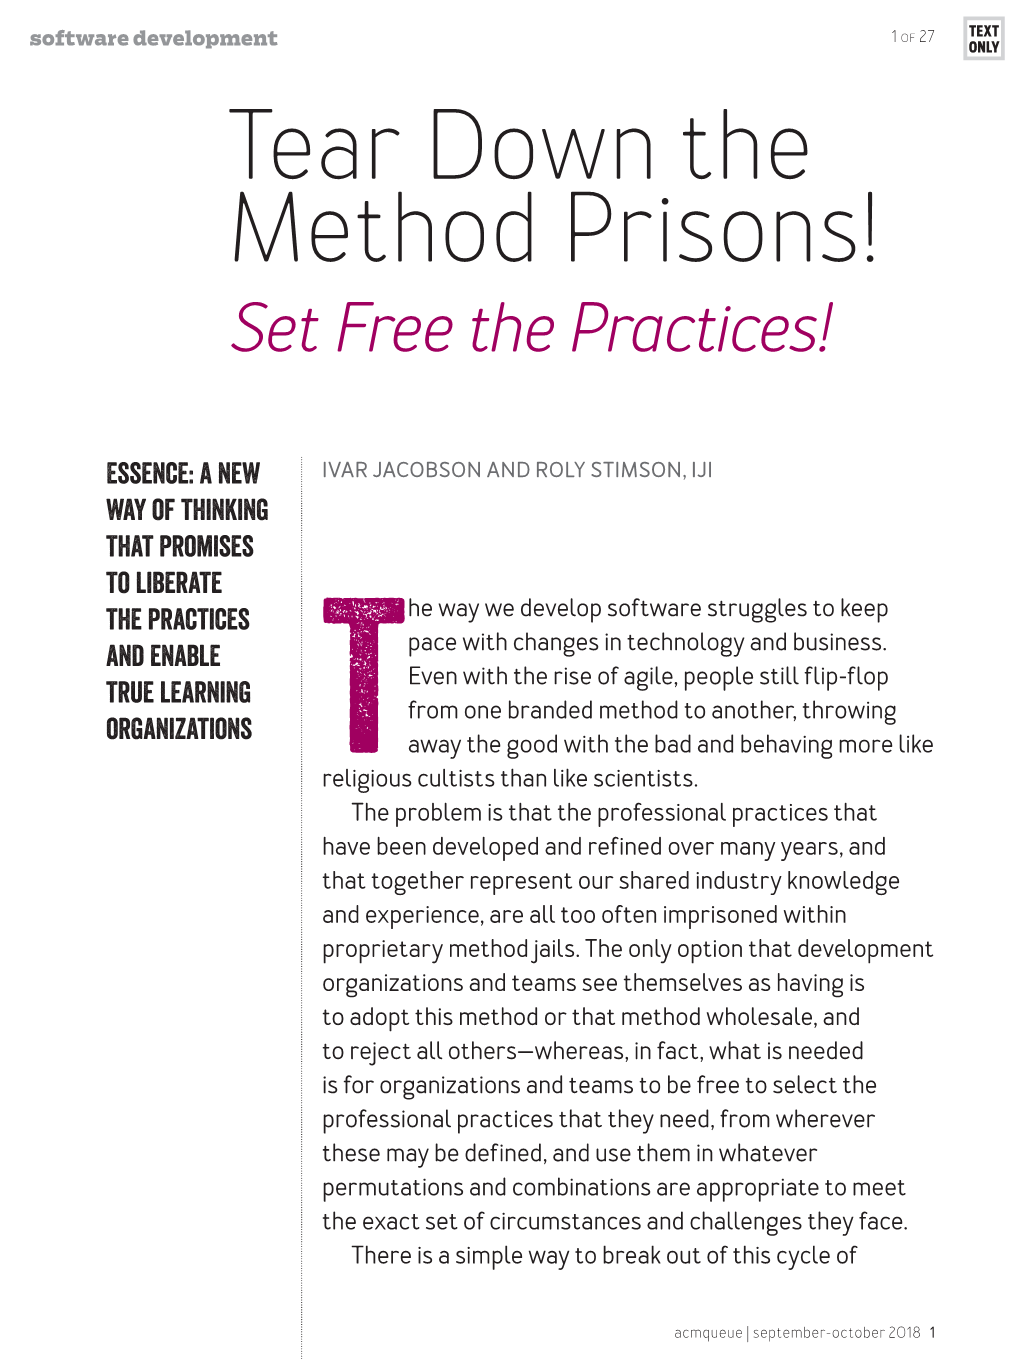 Tear Down the Method Prisons! Set Free the Practices!